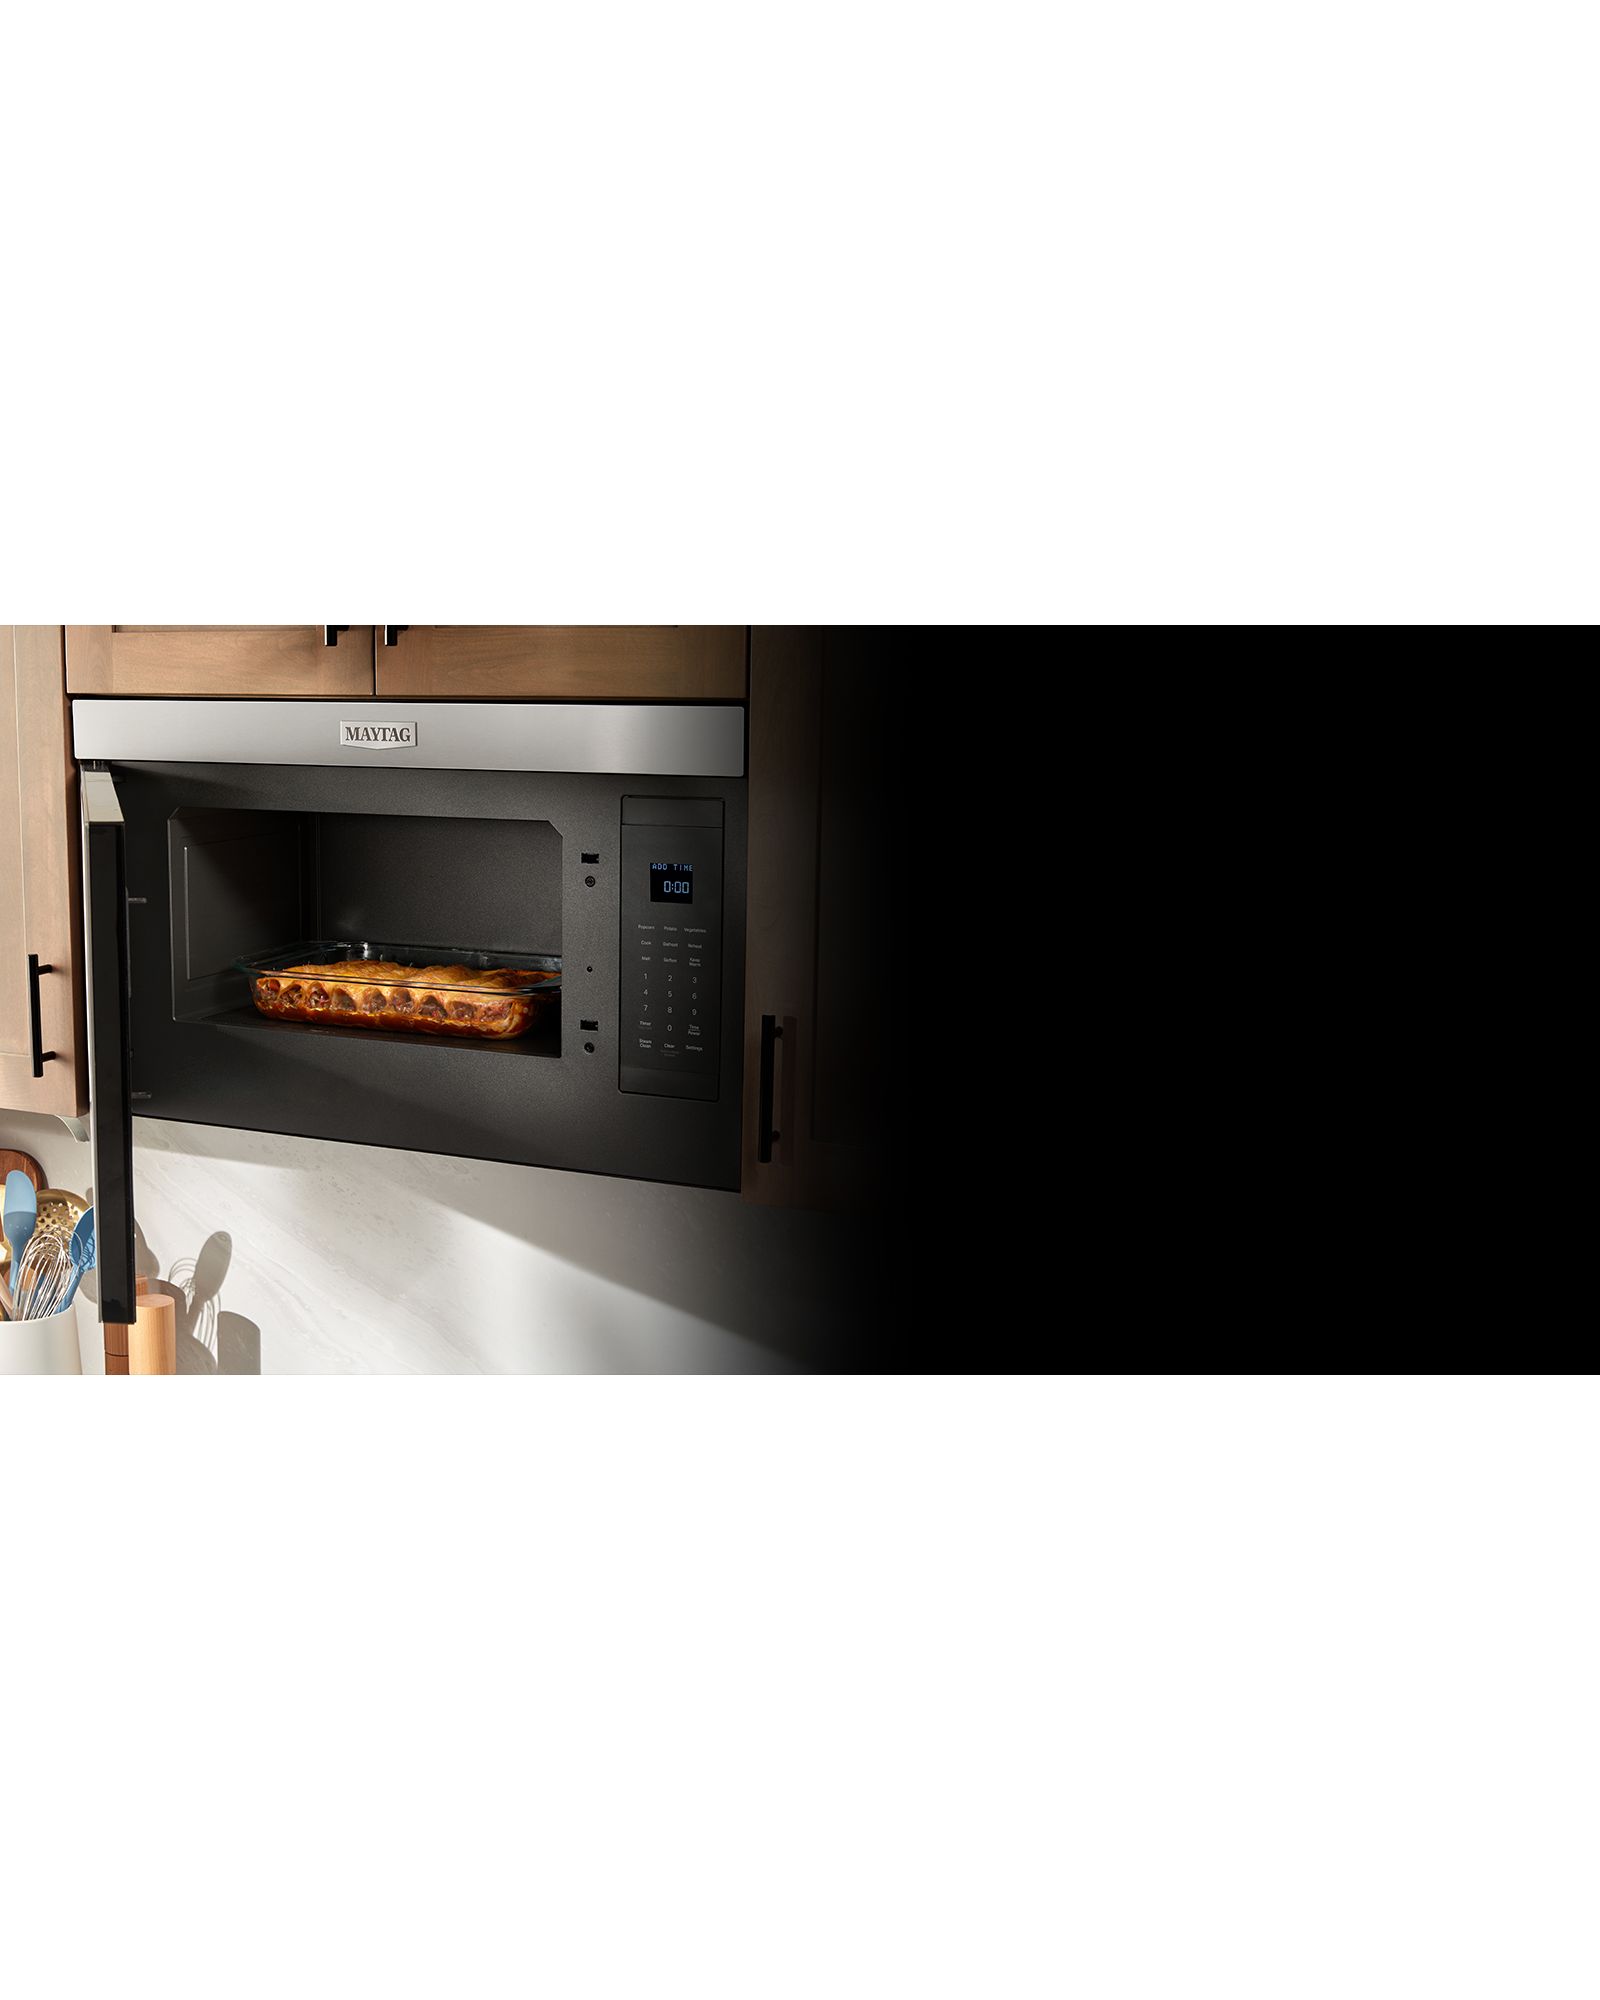 6-in-1 Inverter Microwave Oven Air Fryer Combo, MASTER Series